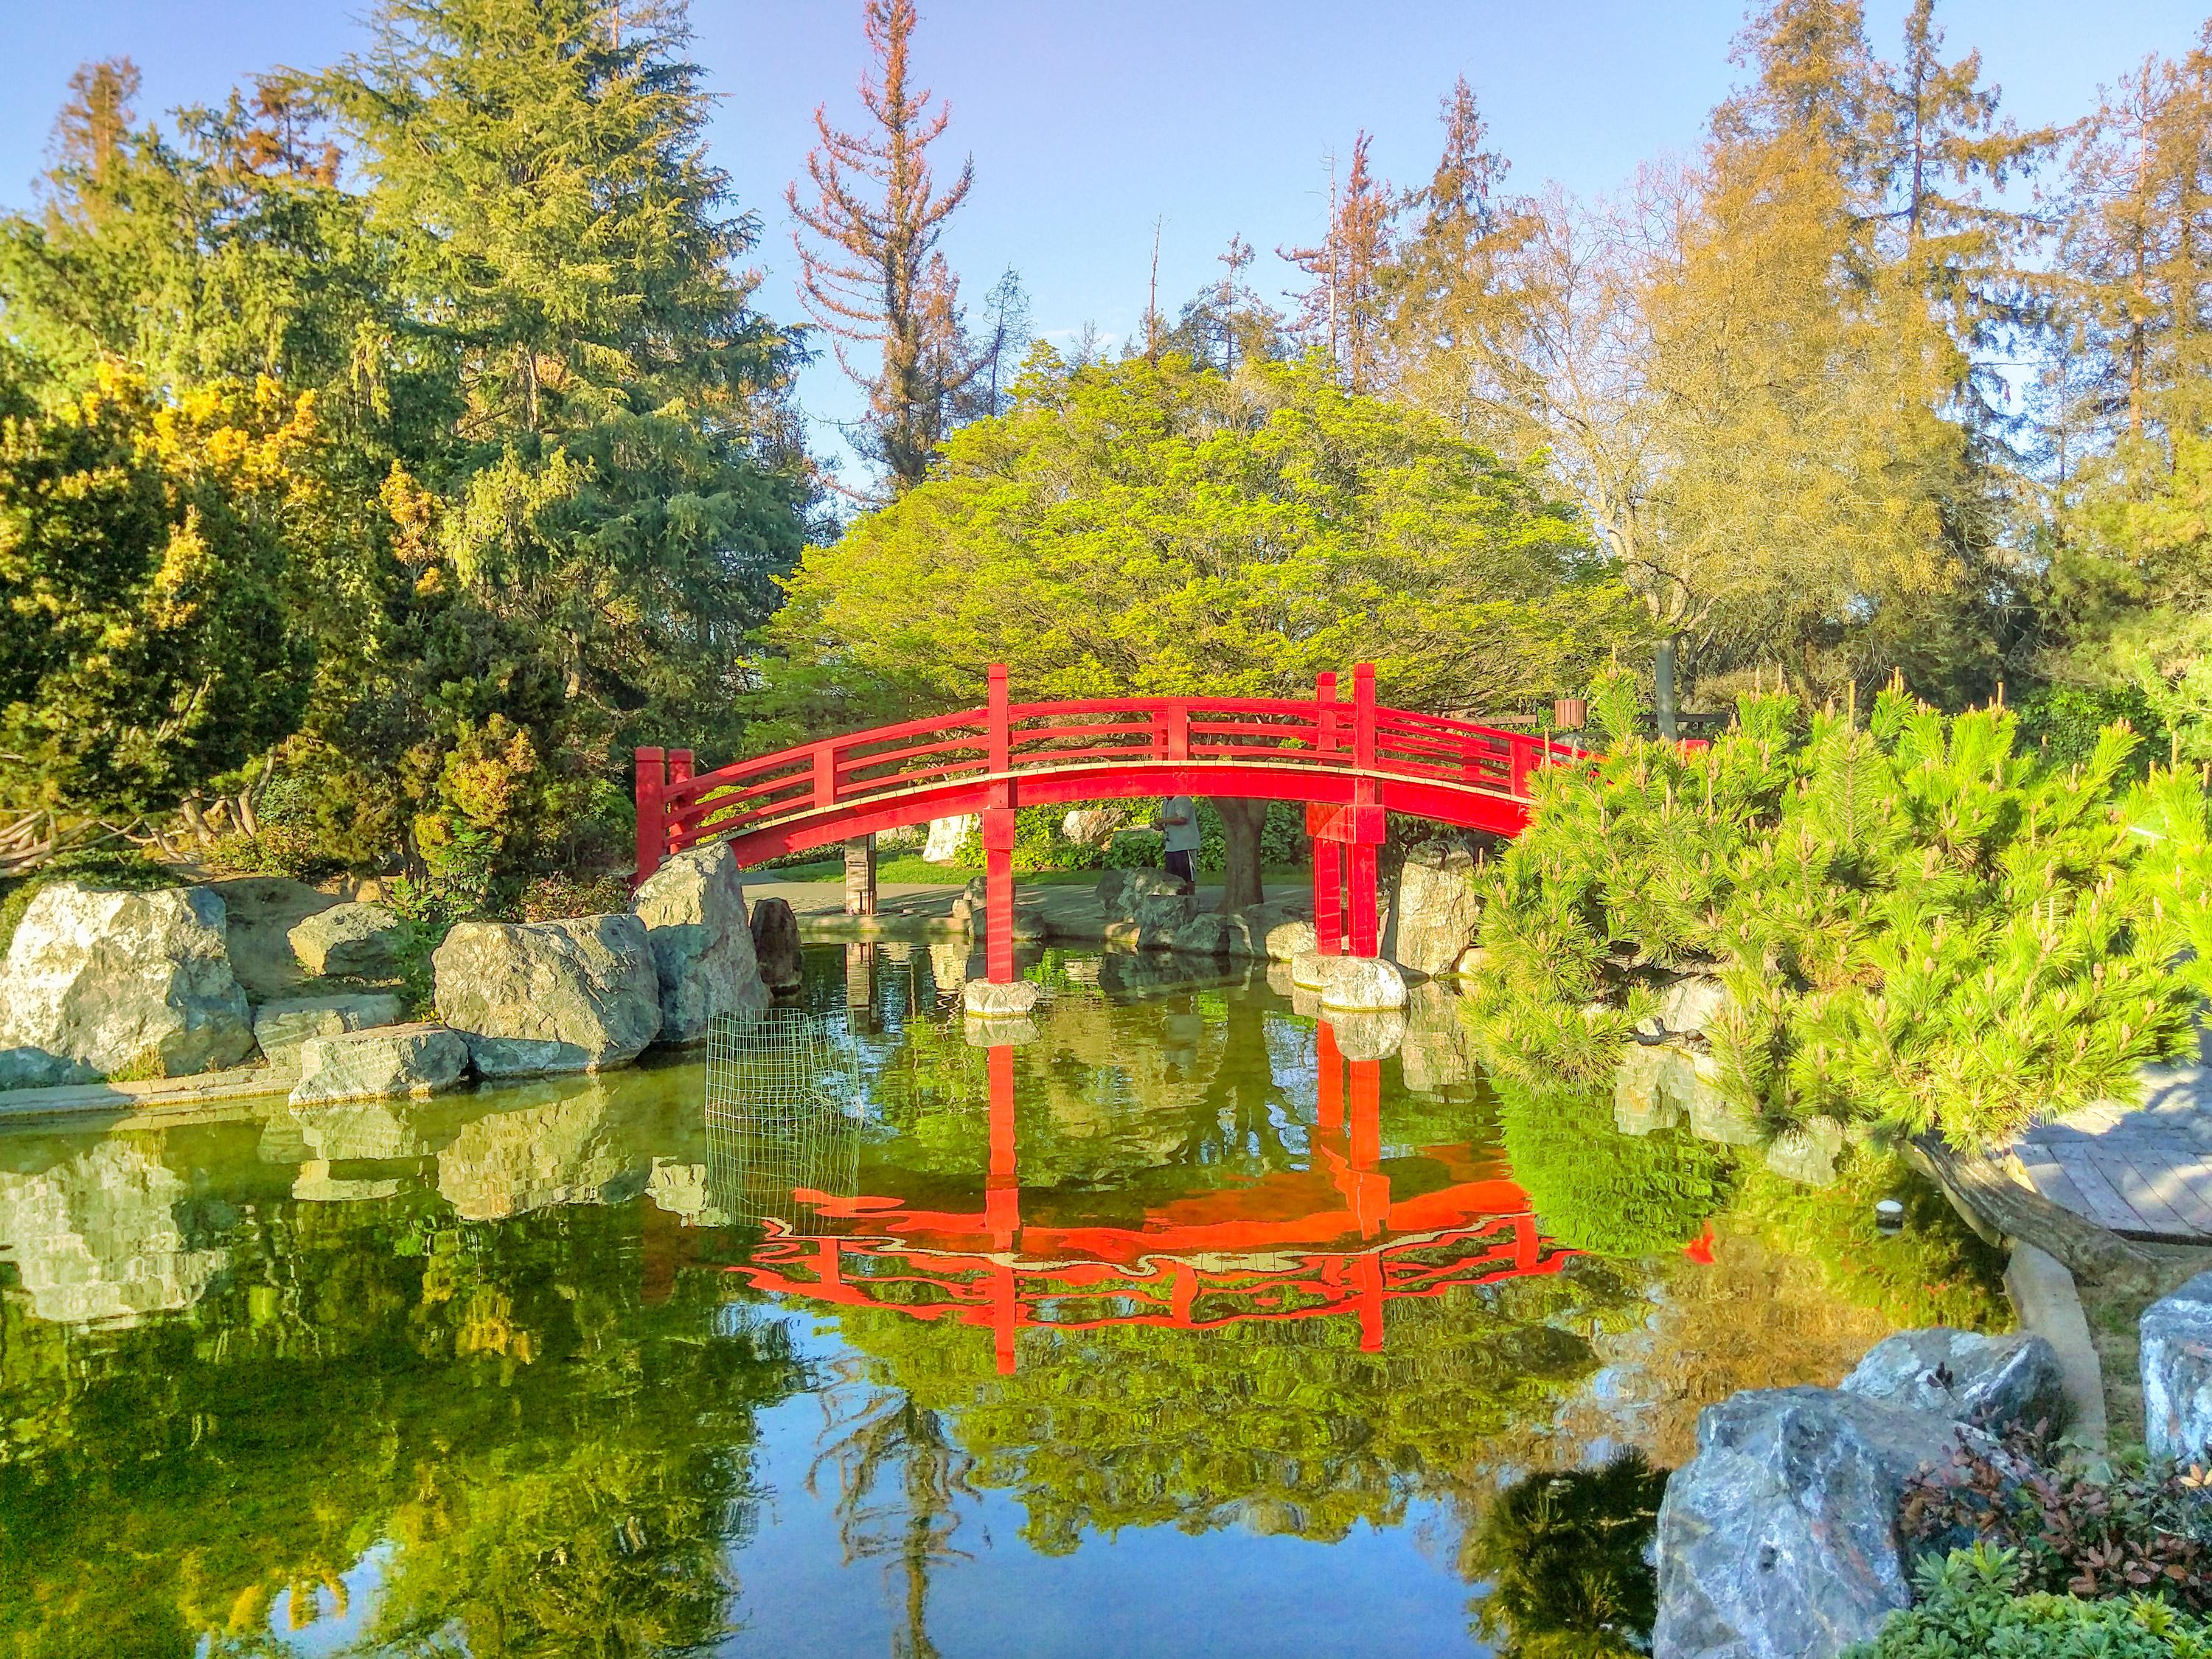 The Japanese Friendship Garden Is A Great Place For Your Next Snap